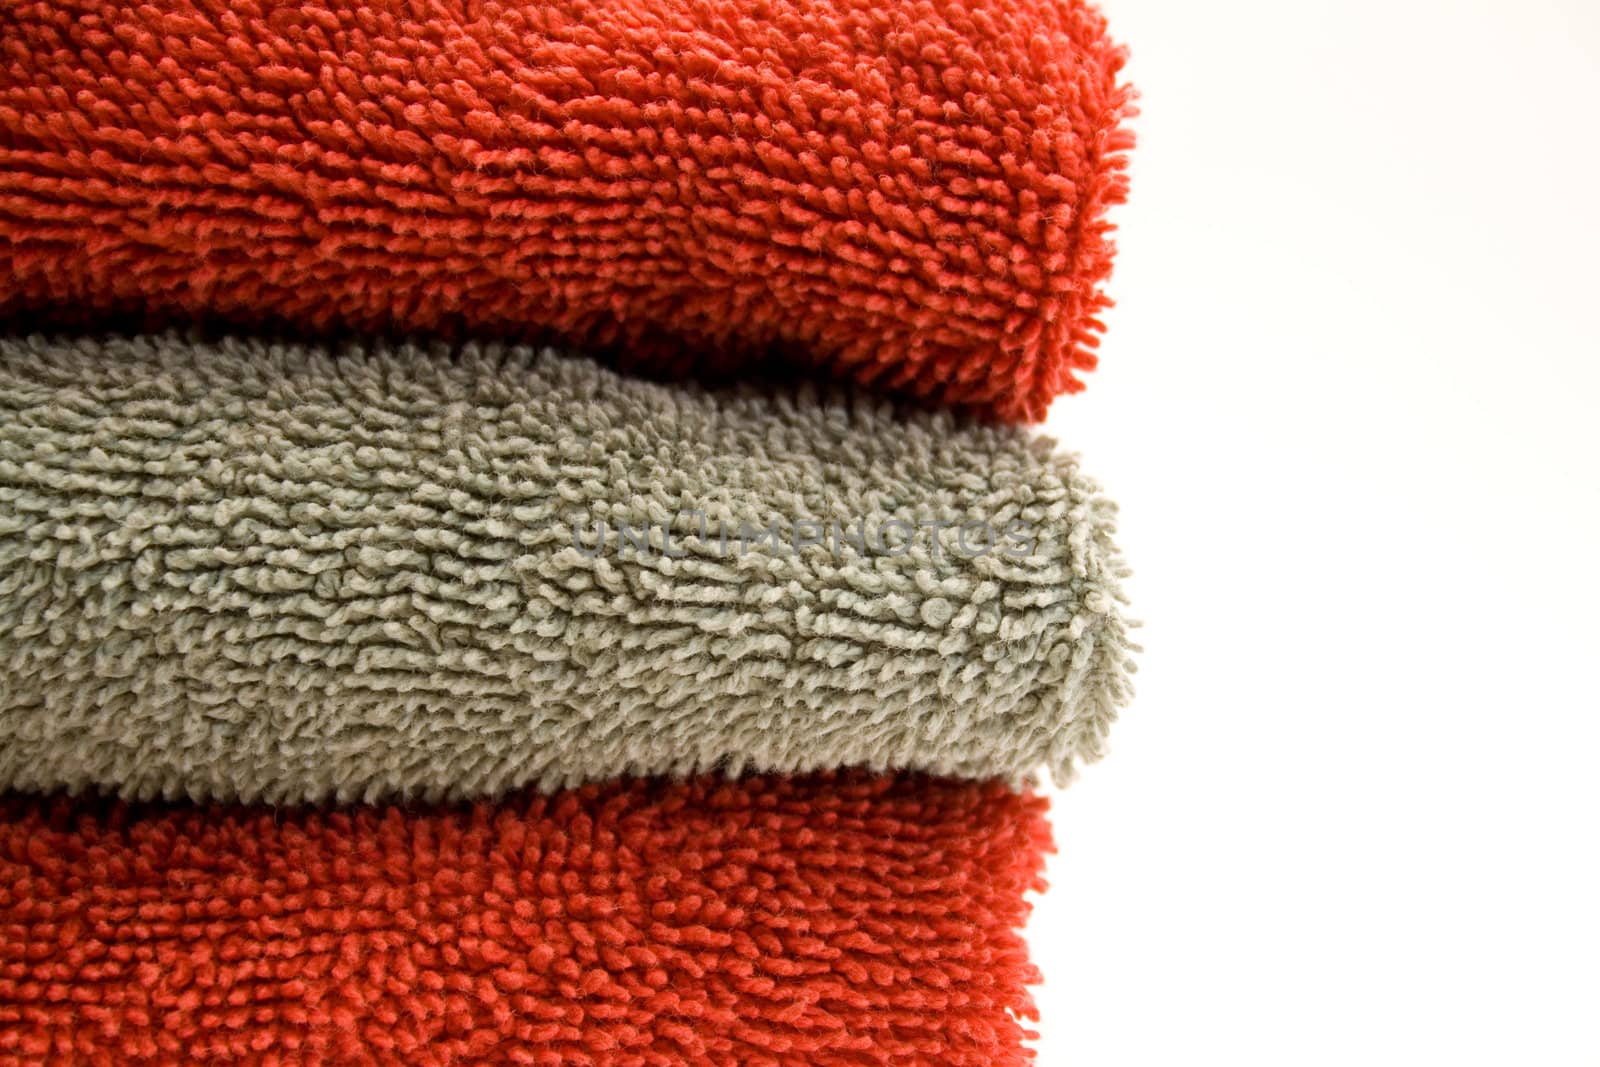 Small stack of bathroom towels